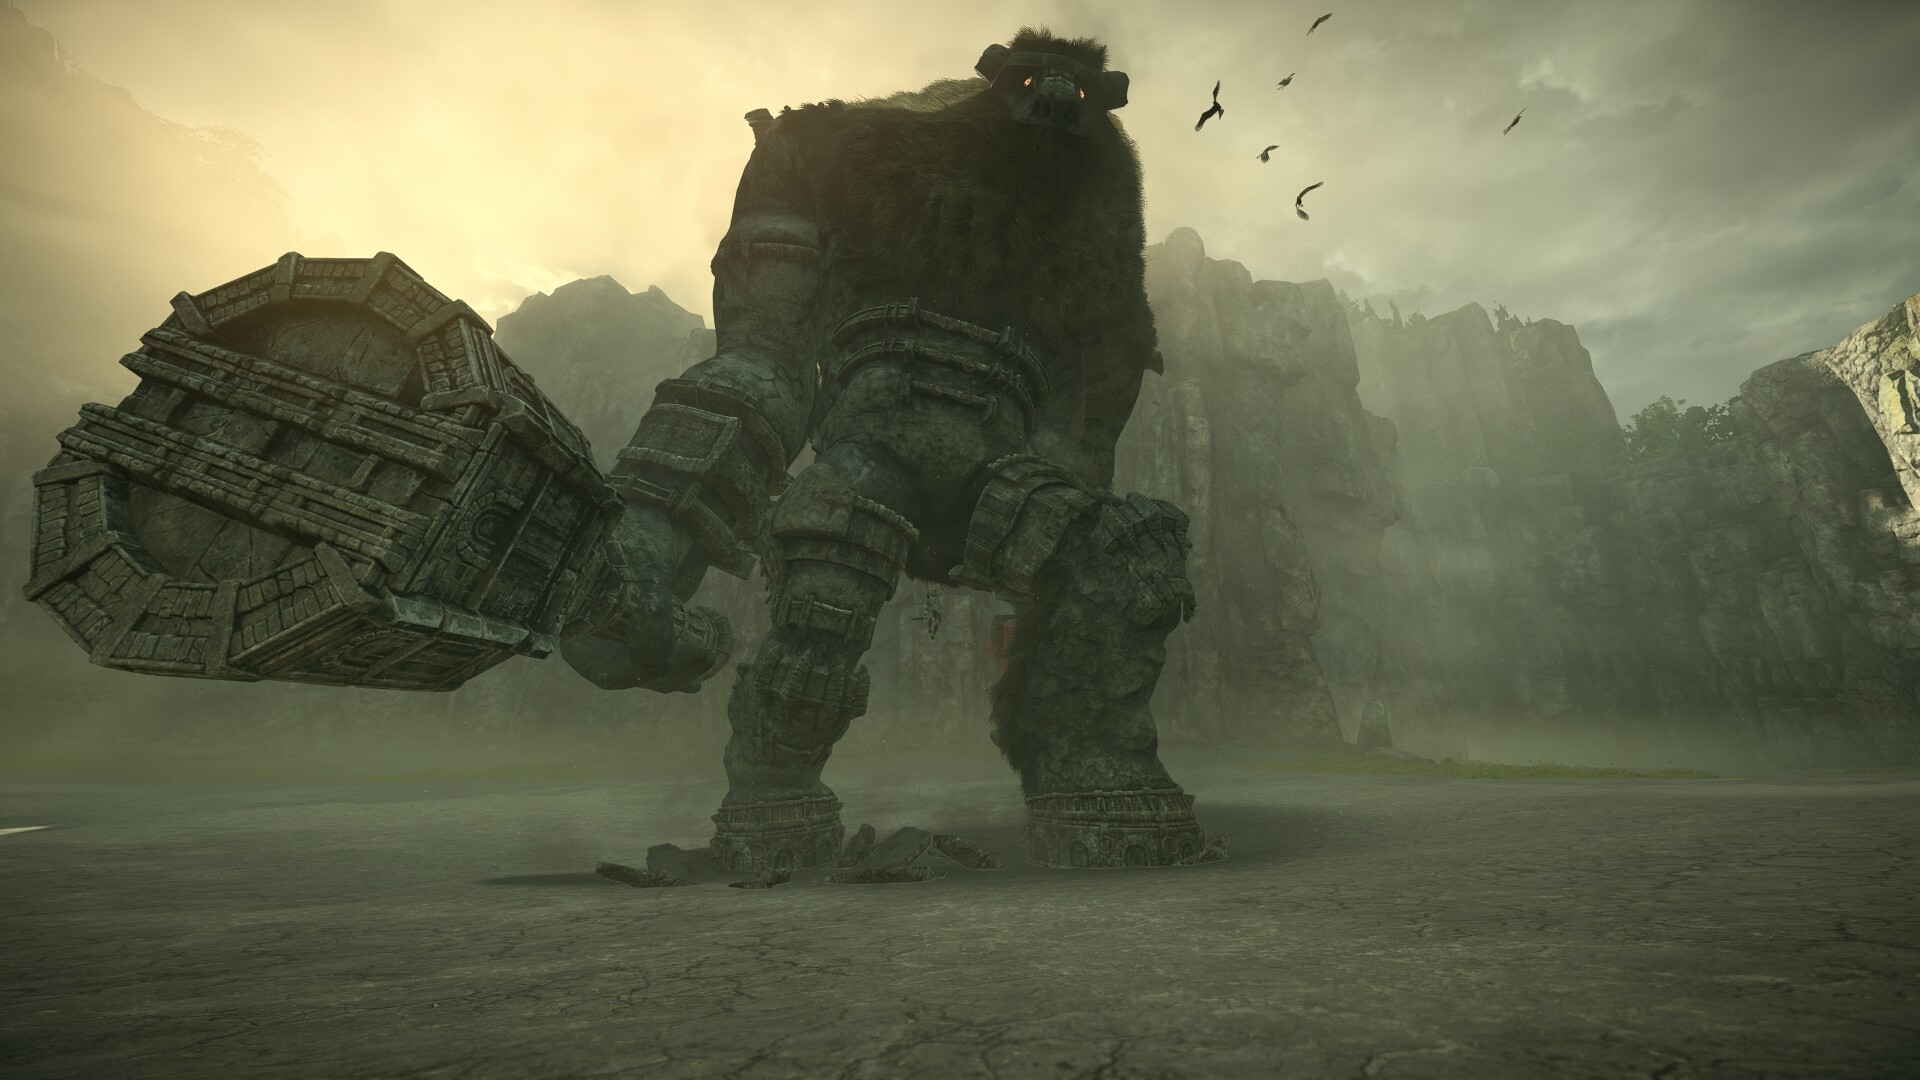 Shadow of the Colossus: The game was directed by Fumito Ueda and developed at Sony Computer Entertainment. 1920x1080 Full HD Wallpaper.